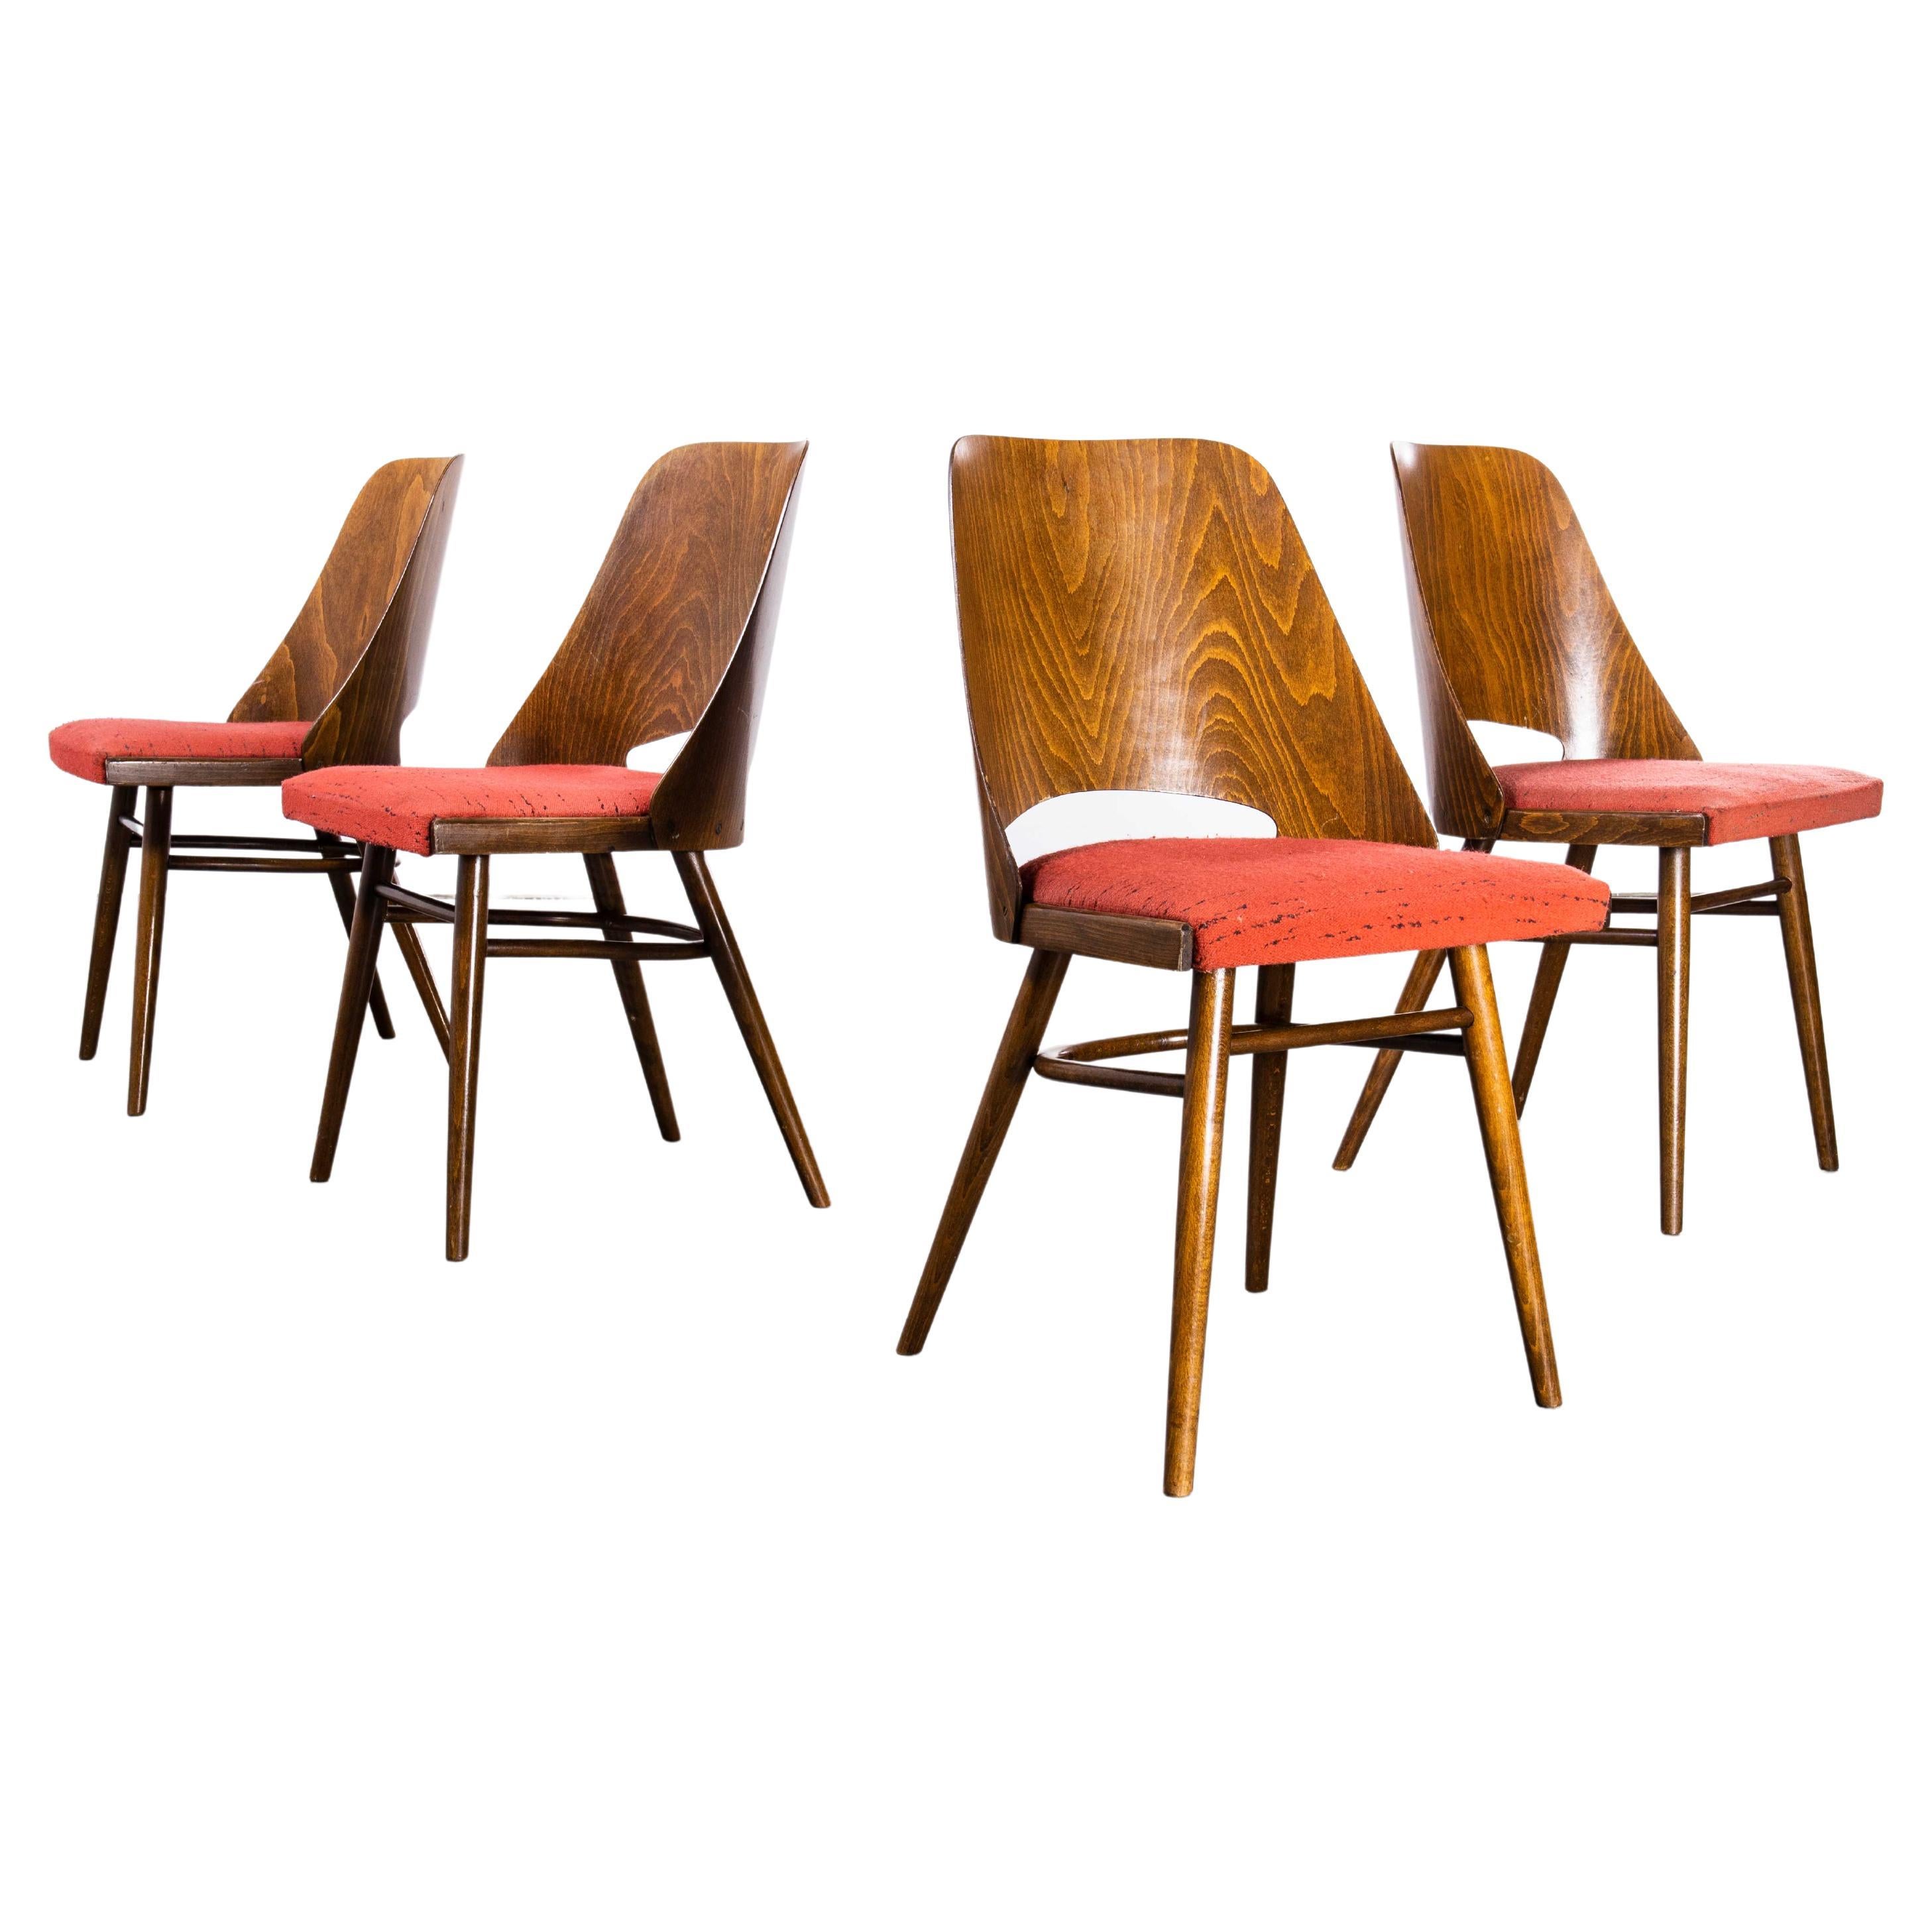 1950's Upholstered Thon Warm Oak Dining Chairs by Radomir Hoffman, Set of Four For Sale